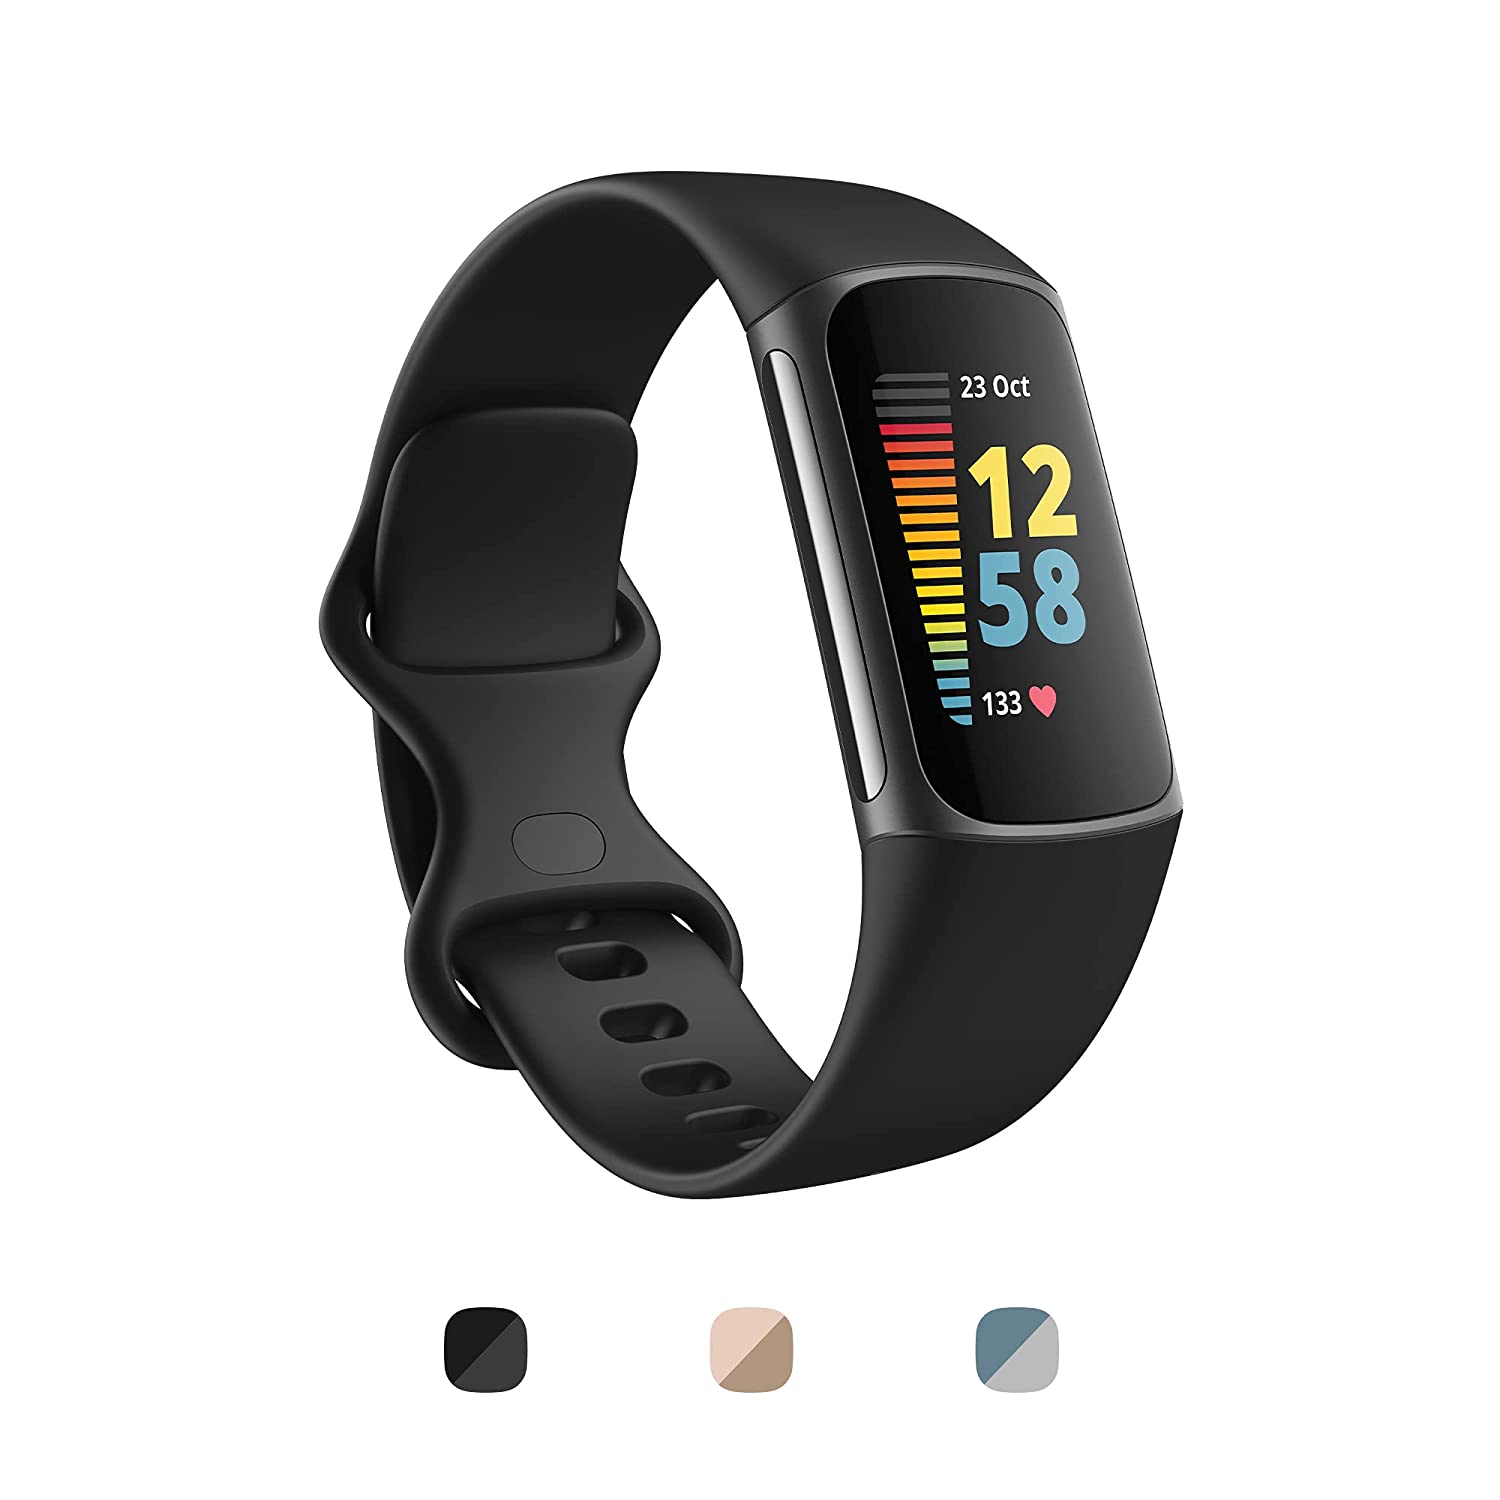 best fitness band in India under 15,000 with inbuilt GPS